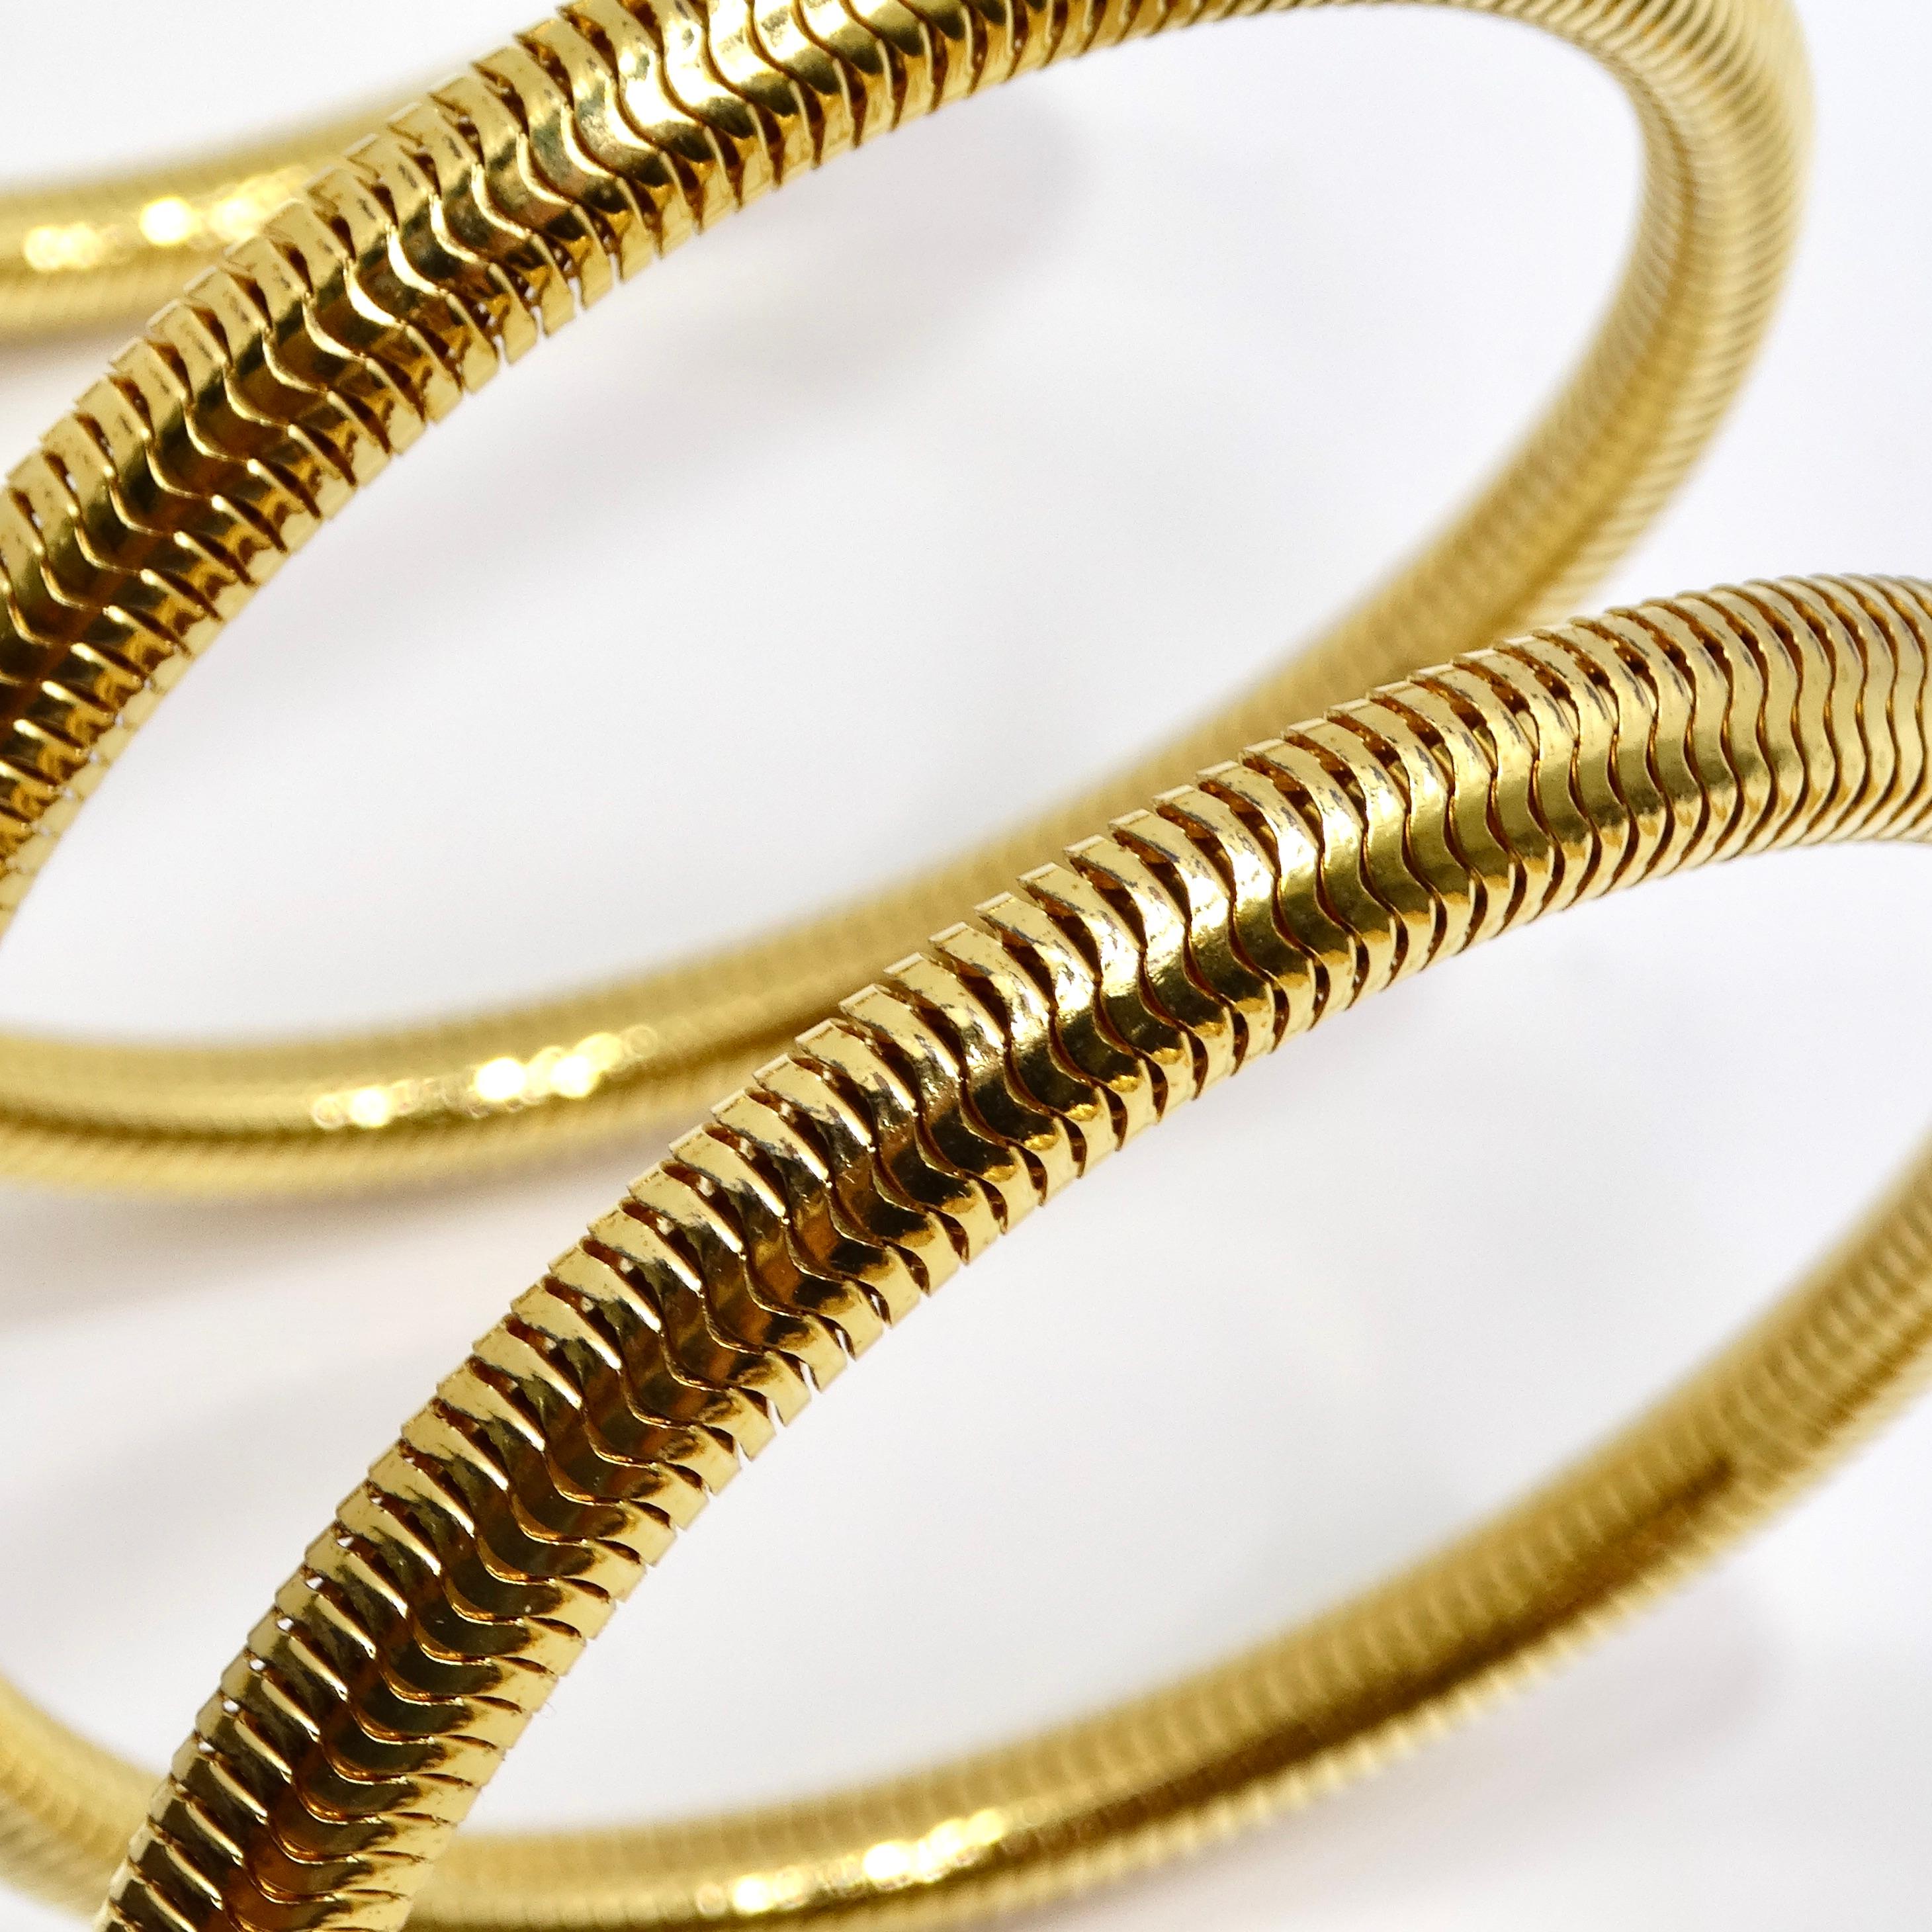 Chanel 1997 Gold Tone Spiral Arm Cuff In Excellent Condition For Sale In Scottsdale, AZ